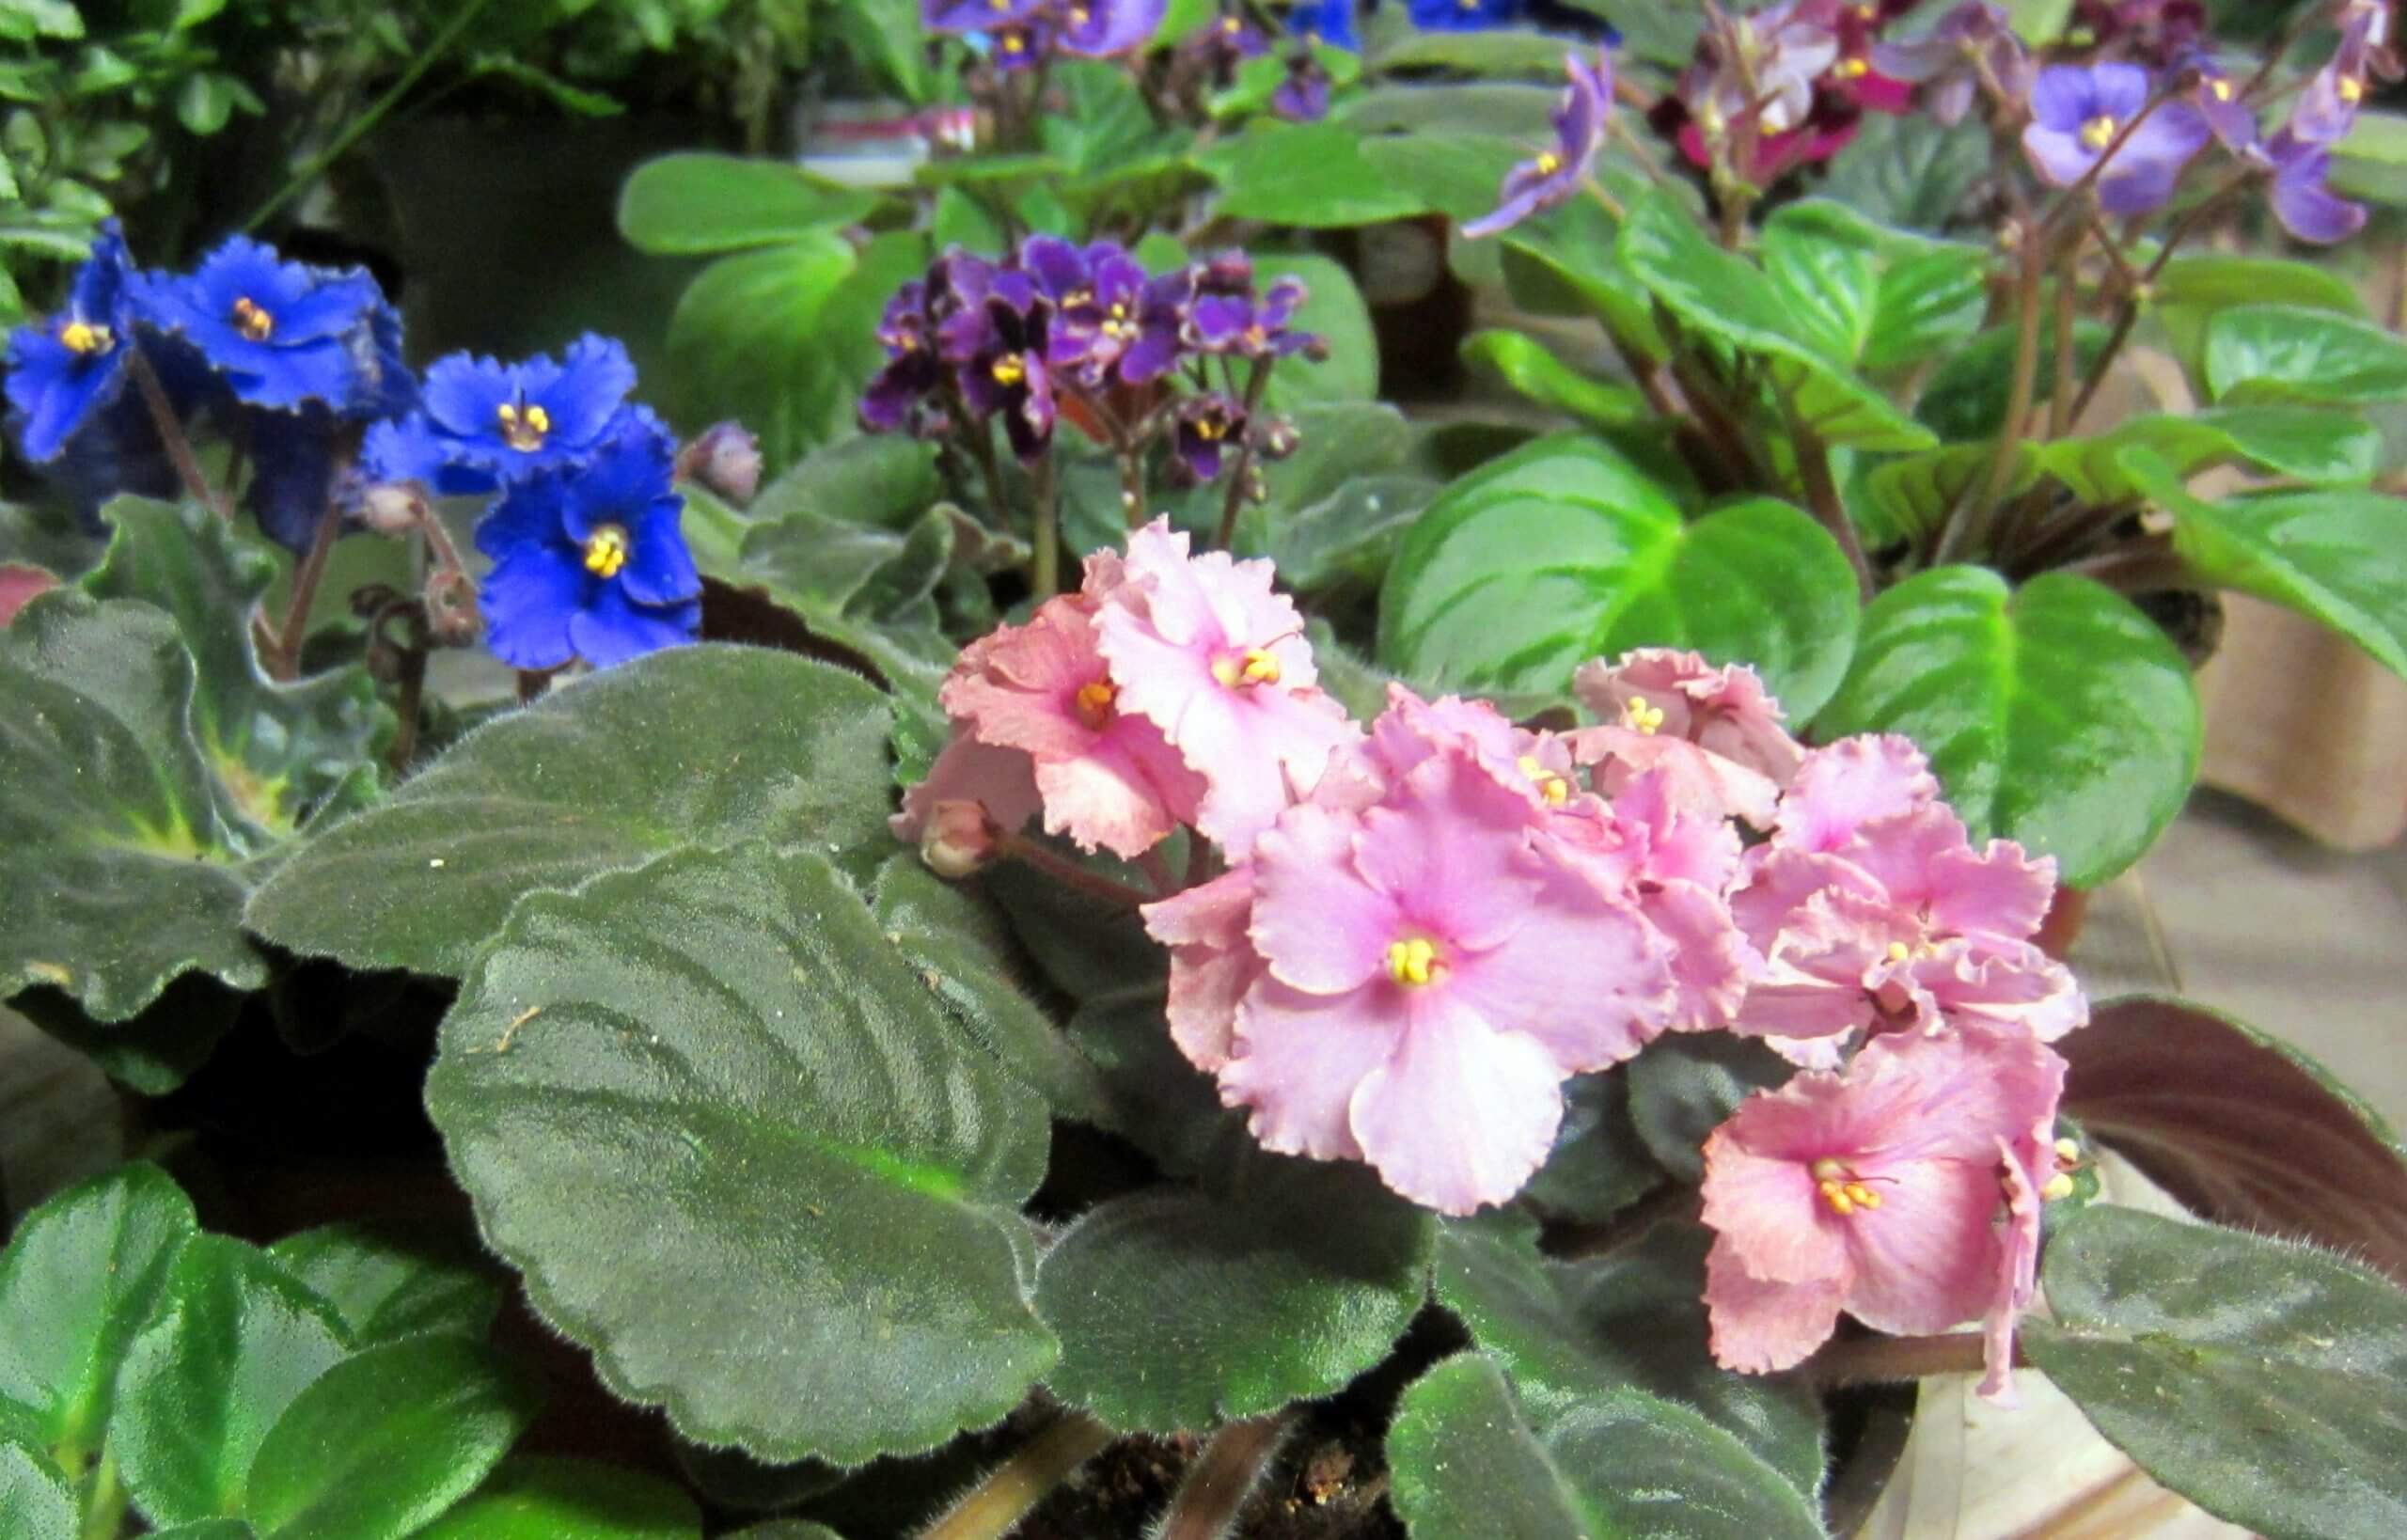 The African Violet, America’s #1 Houseplant